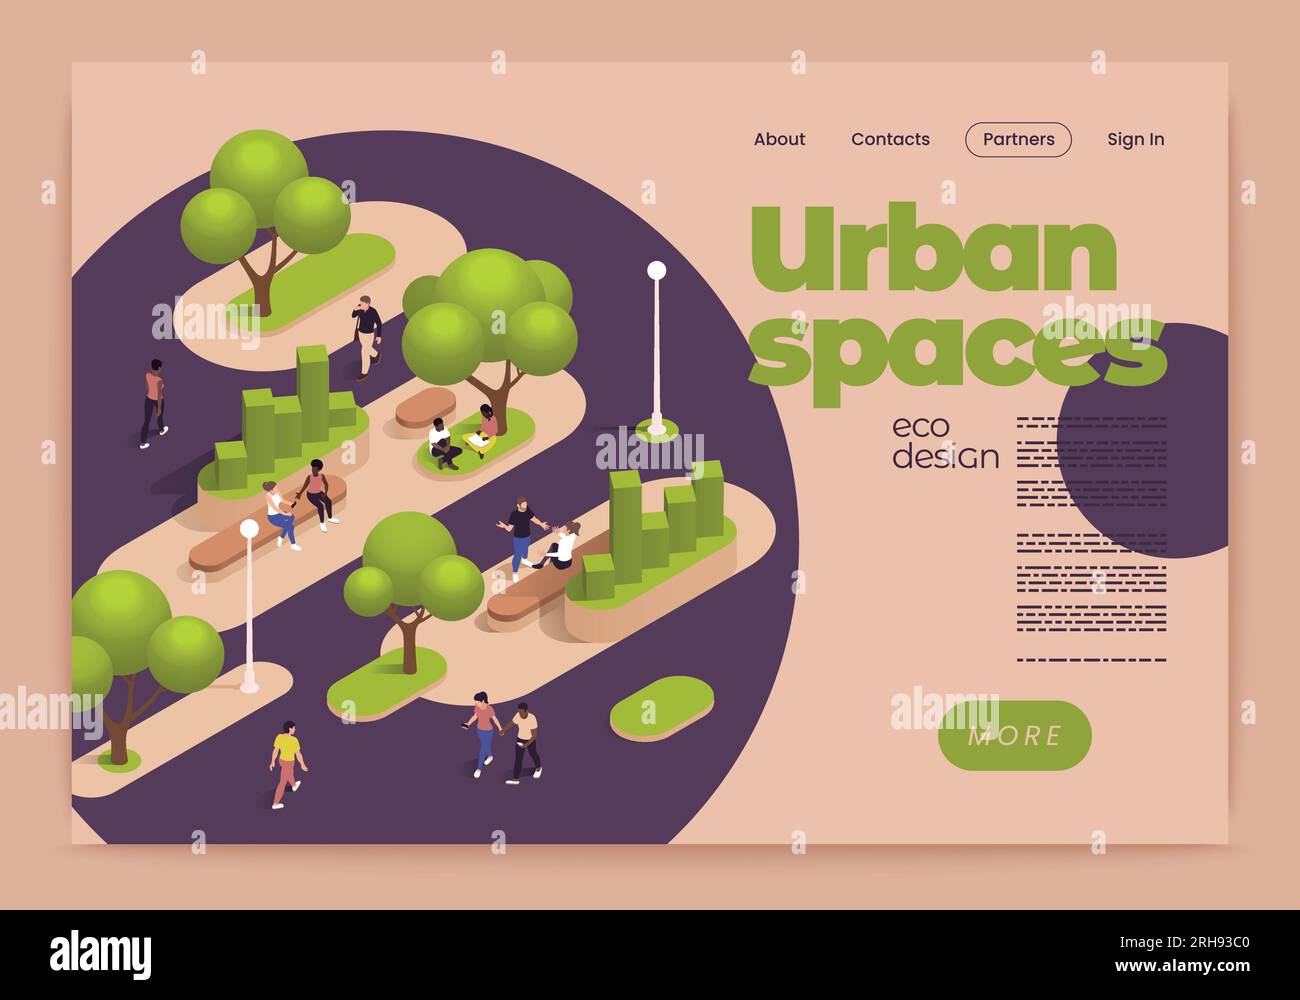 Urban city green spaces eco design isometric banner or landing page with links descriptions and more button vector illustration Stock Vector